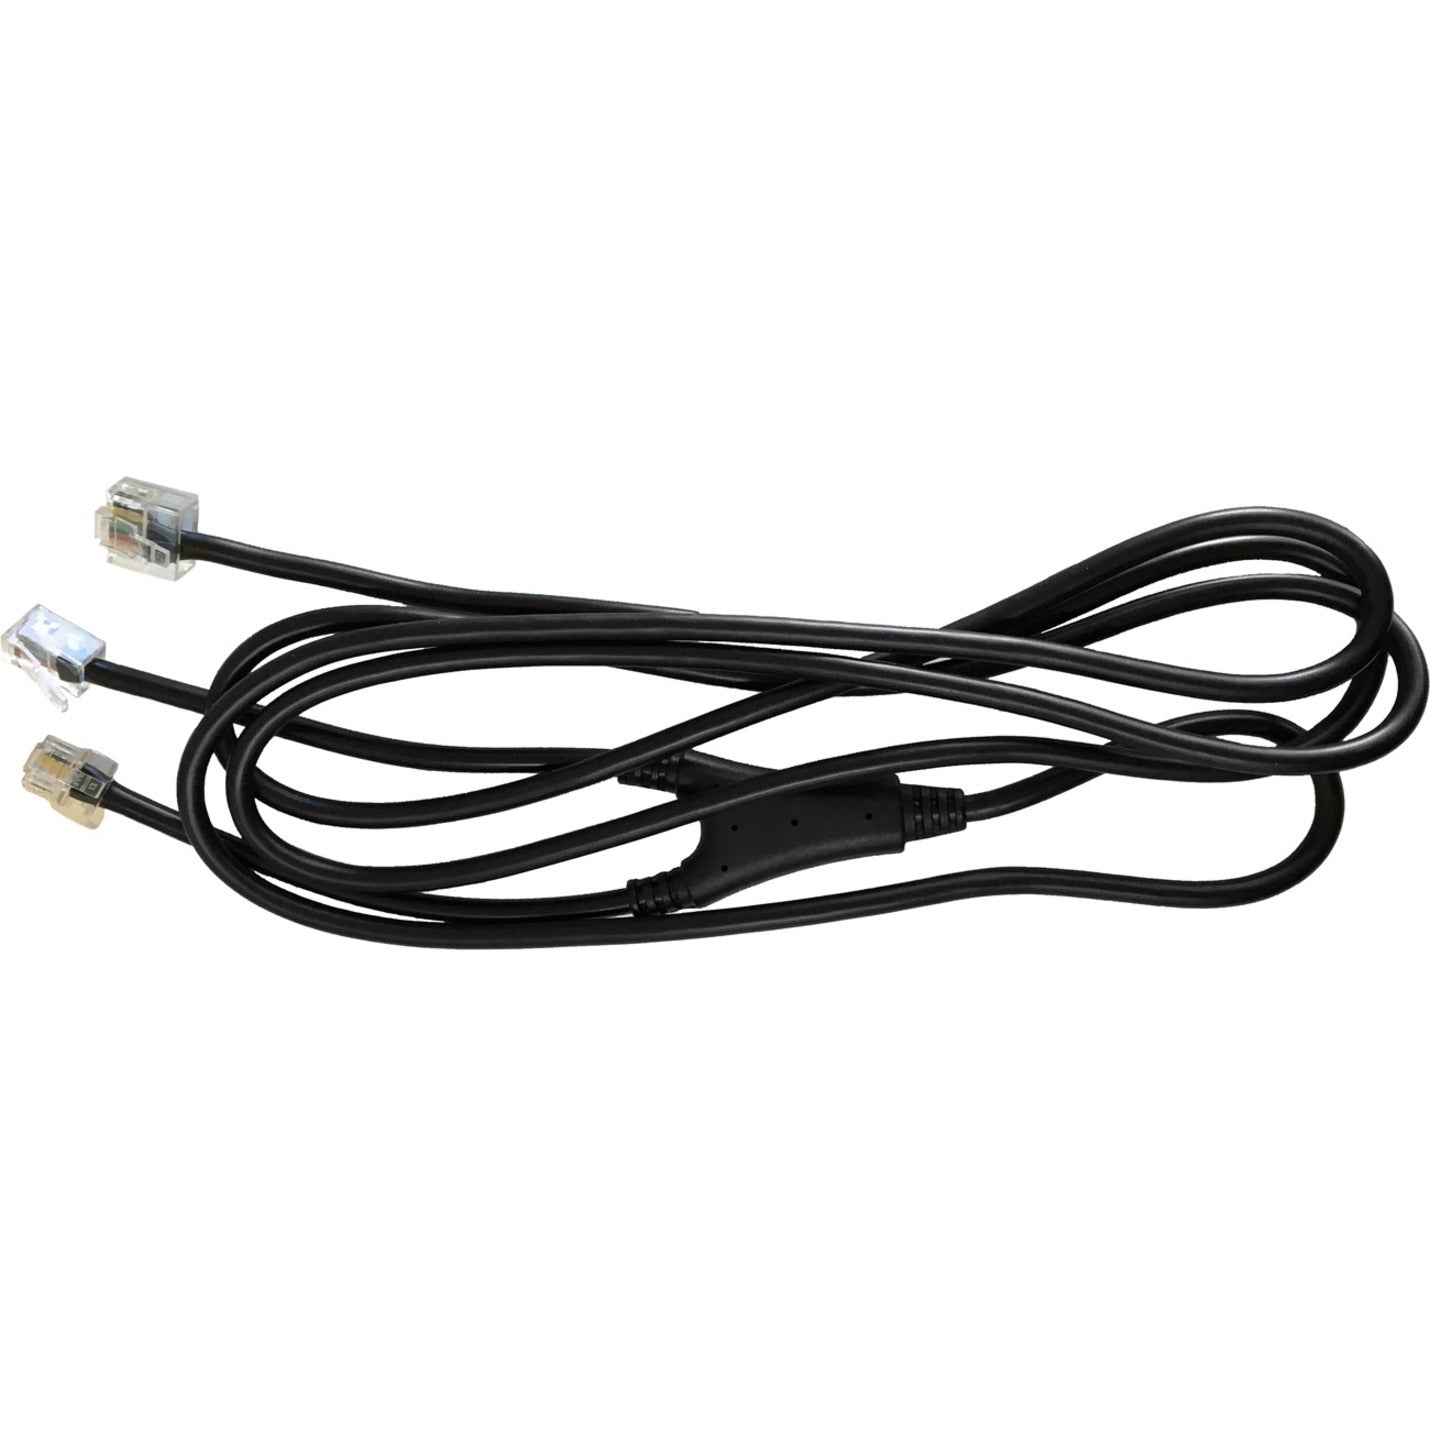 Spracht EHS-2004 Phone Cable for Aastra Siemens IP Phones, Headset Compatibility